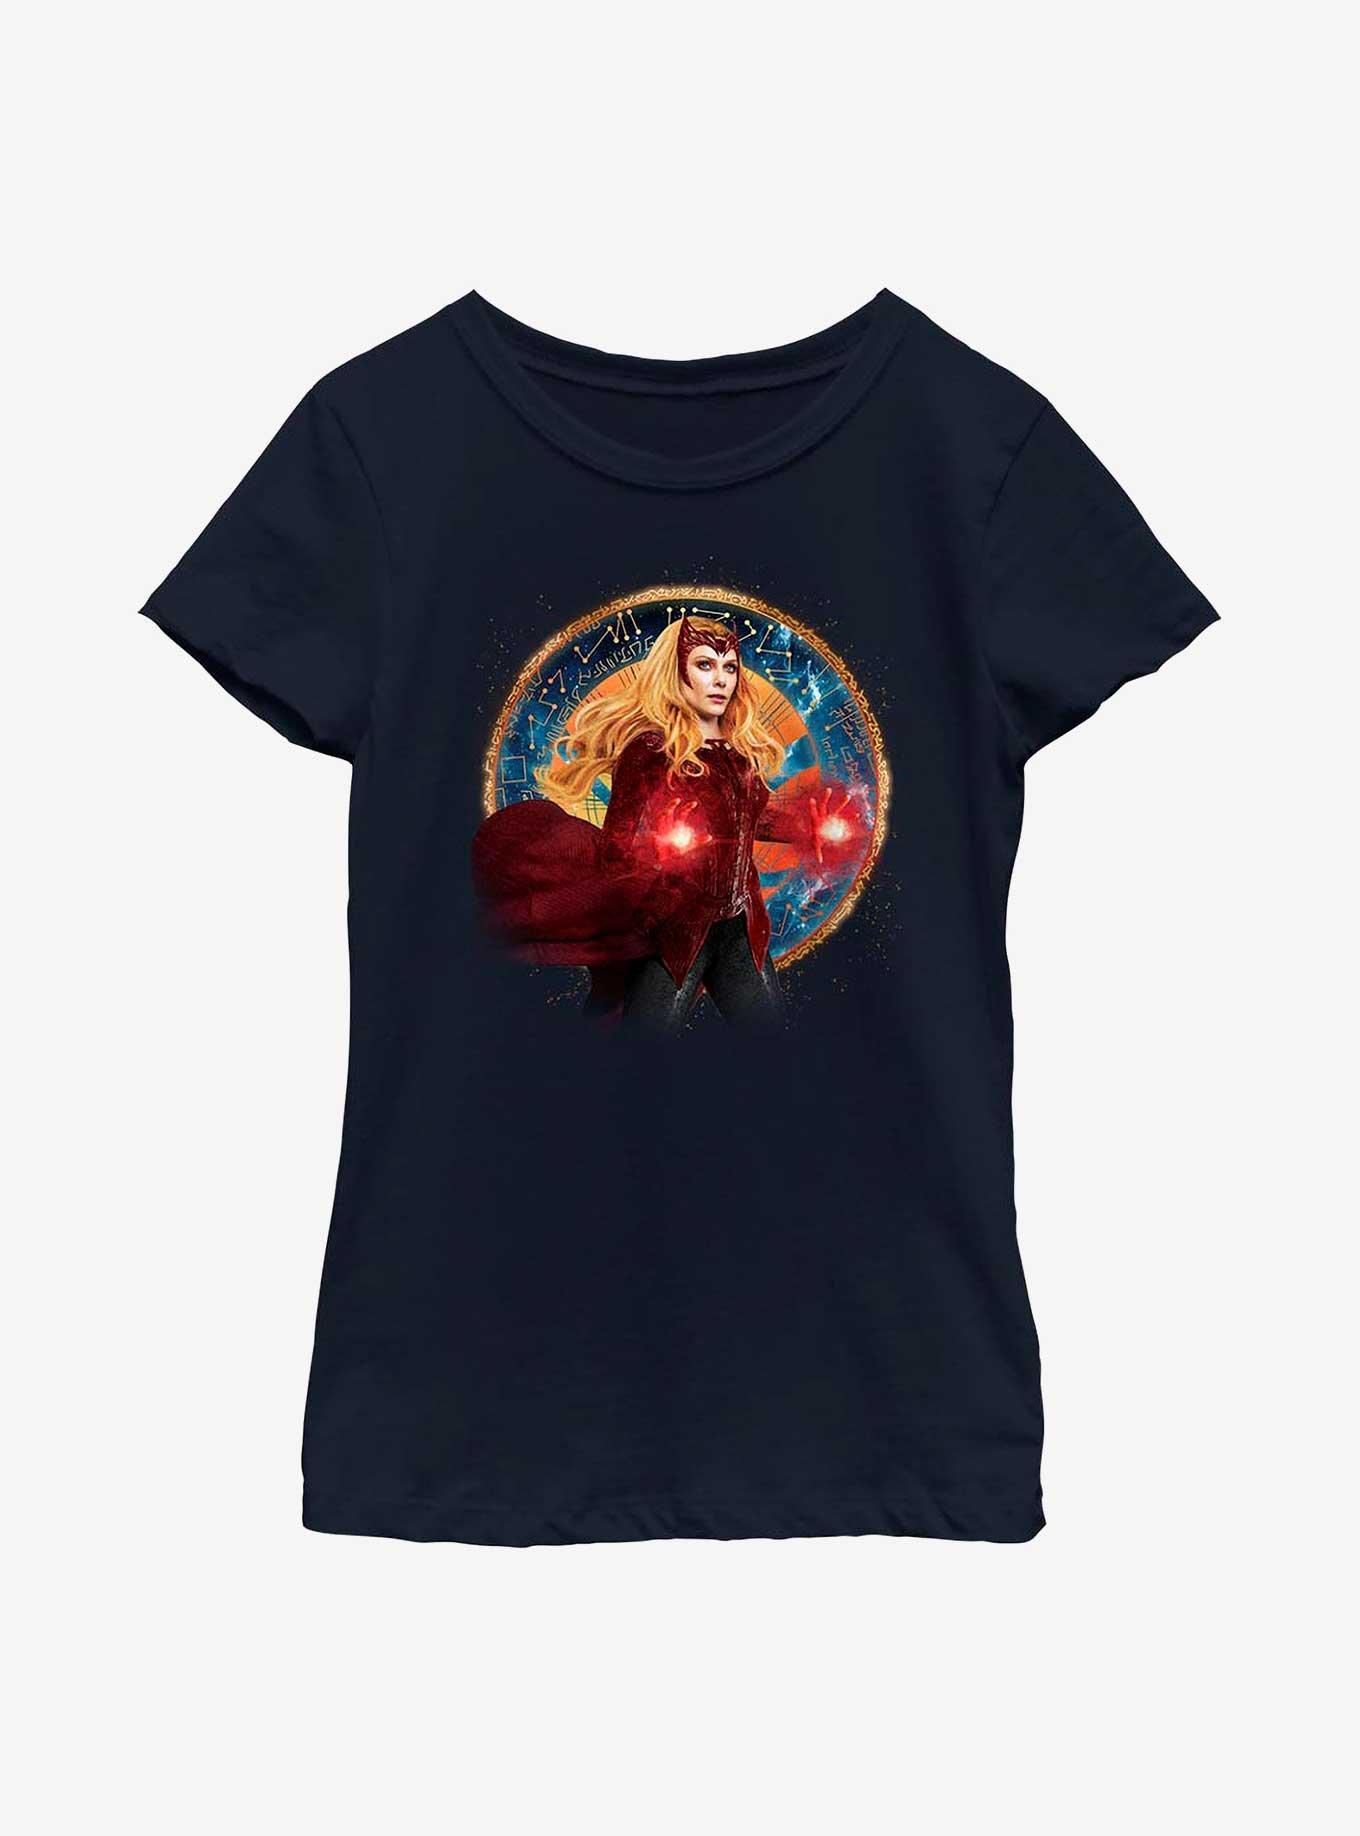 Marvel Doctor Strange In The Multiverse Of Madness Scarlet Witch Portrait Youth Girls T-Shirt, NAVY, hi-res